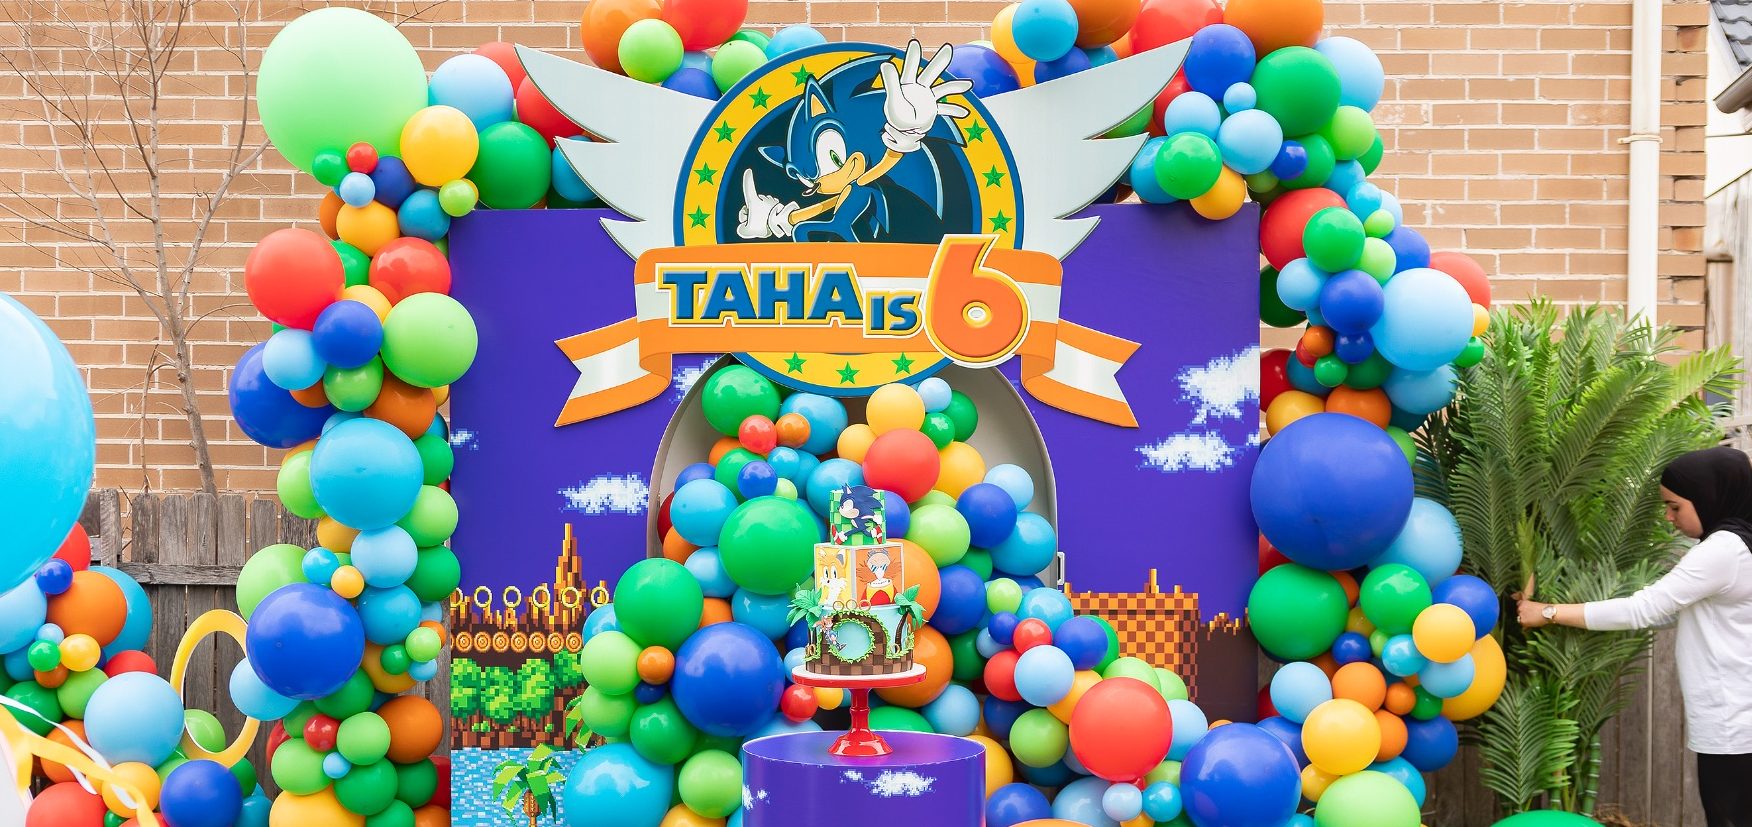 Impress all your kid's friends with the sonic themed birthday